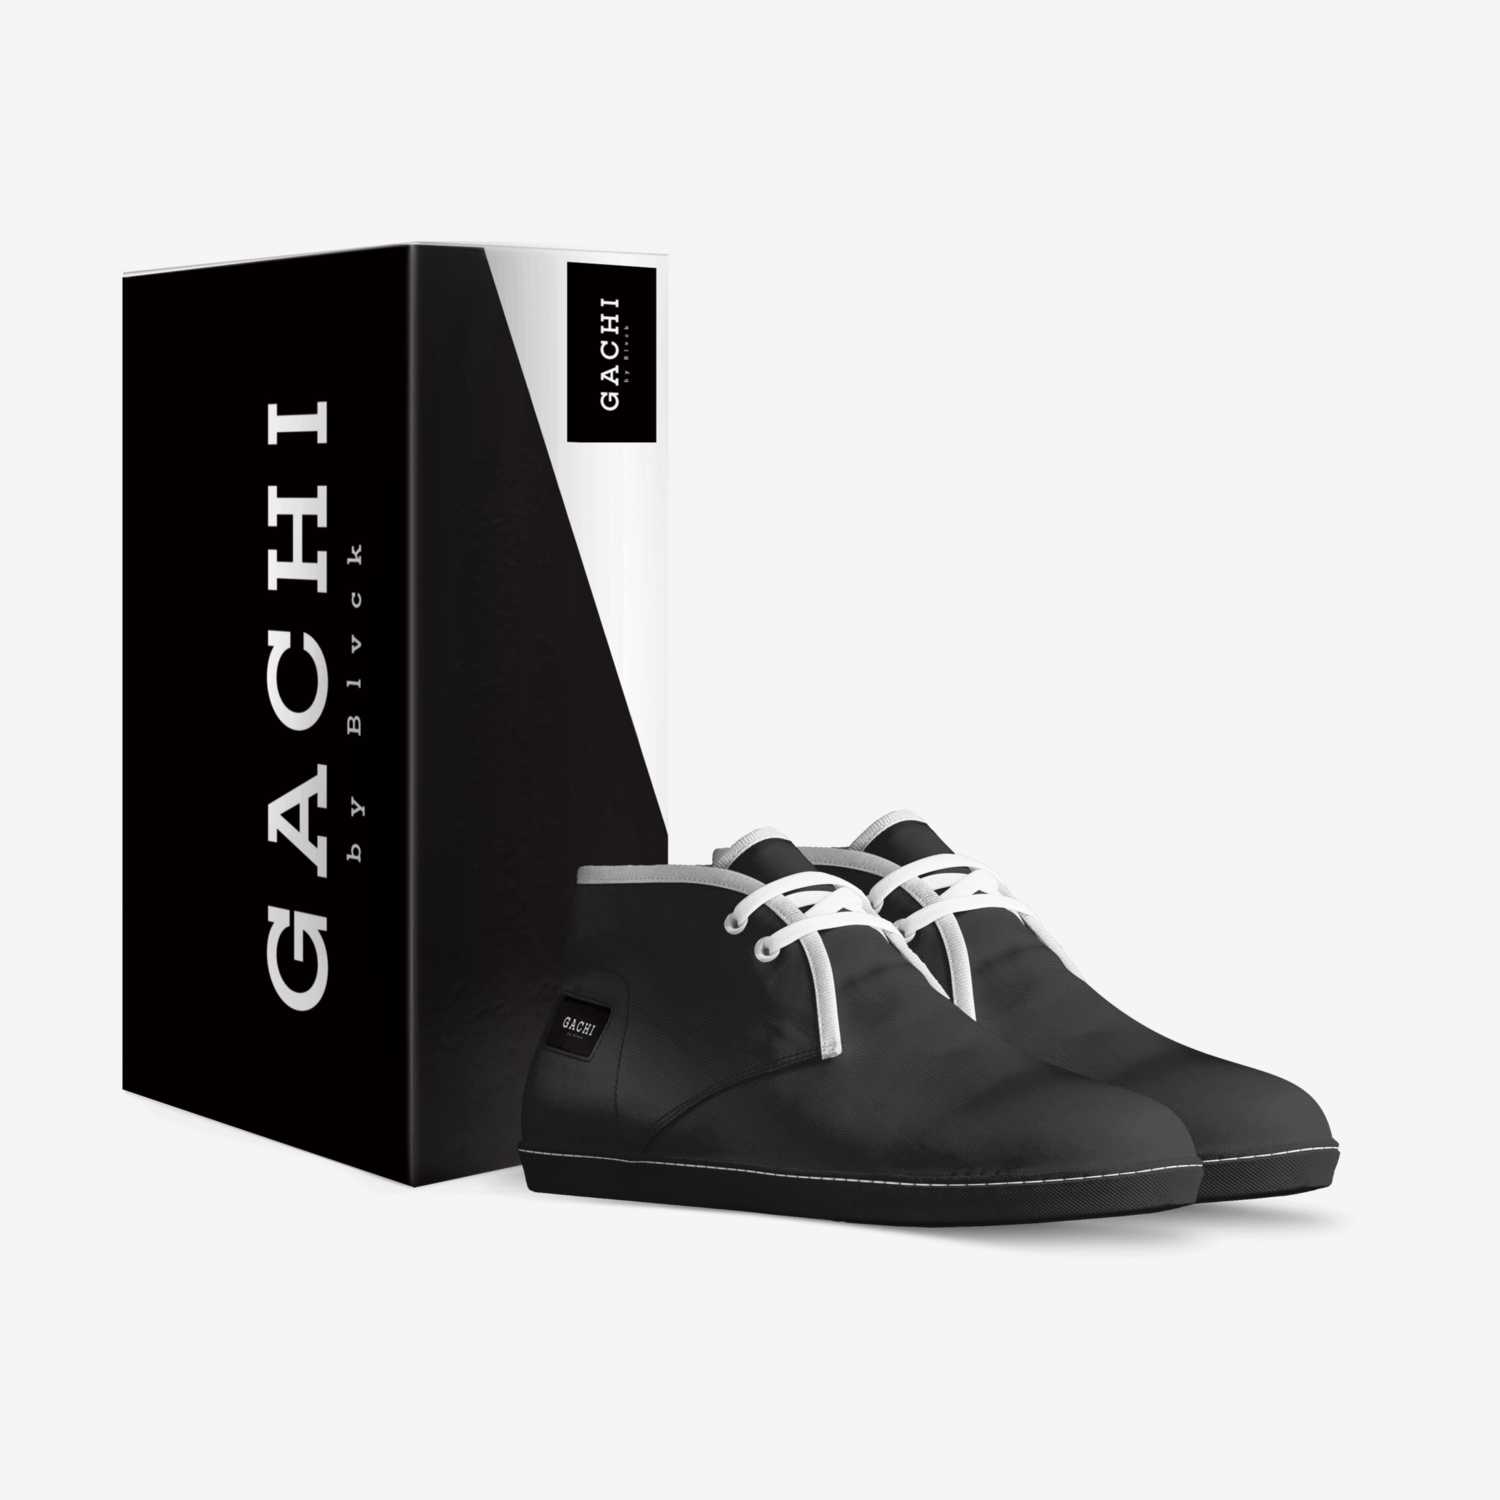 Tuxedo by GbyB custom made in Italy shoes by Danny Blvck | Box view